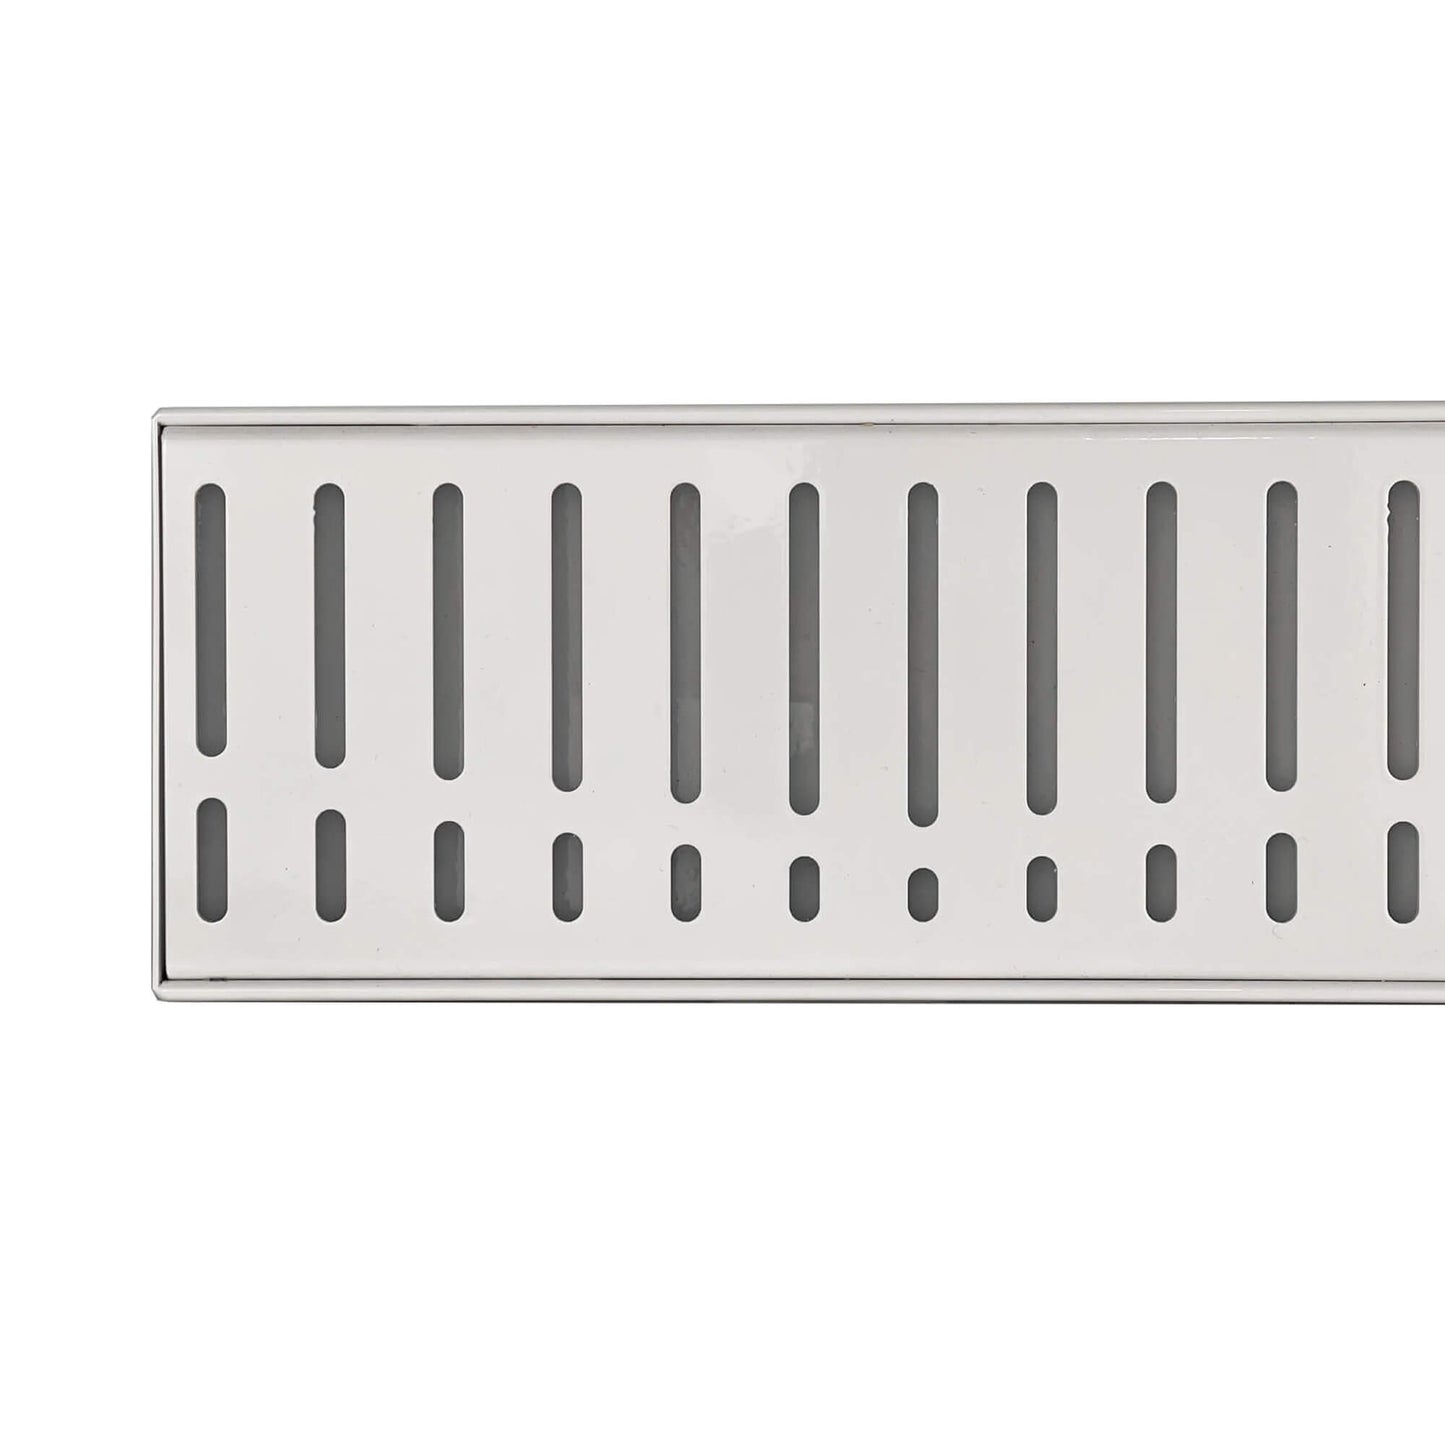 Flow Pattern Grate and Channel Drain - White